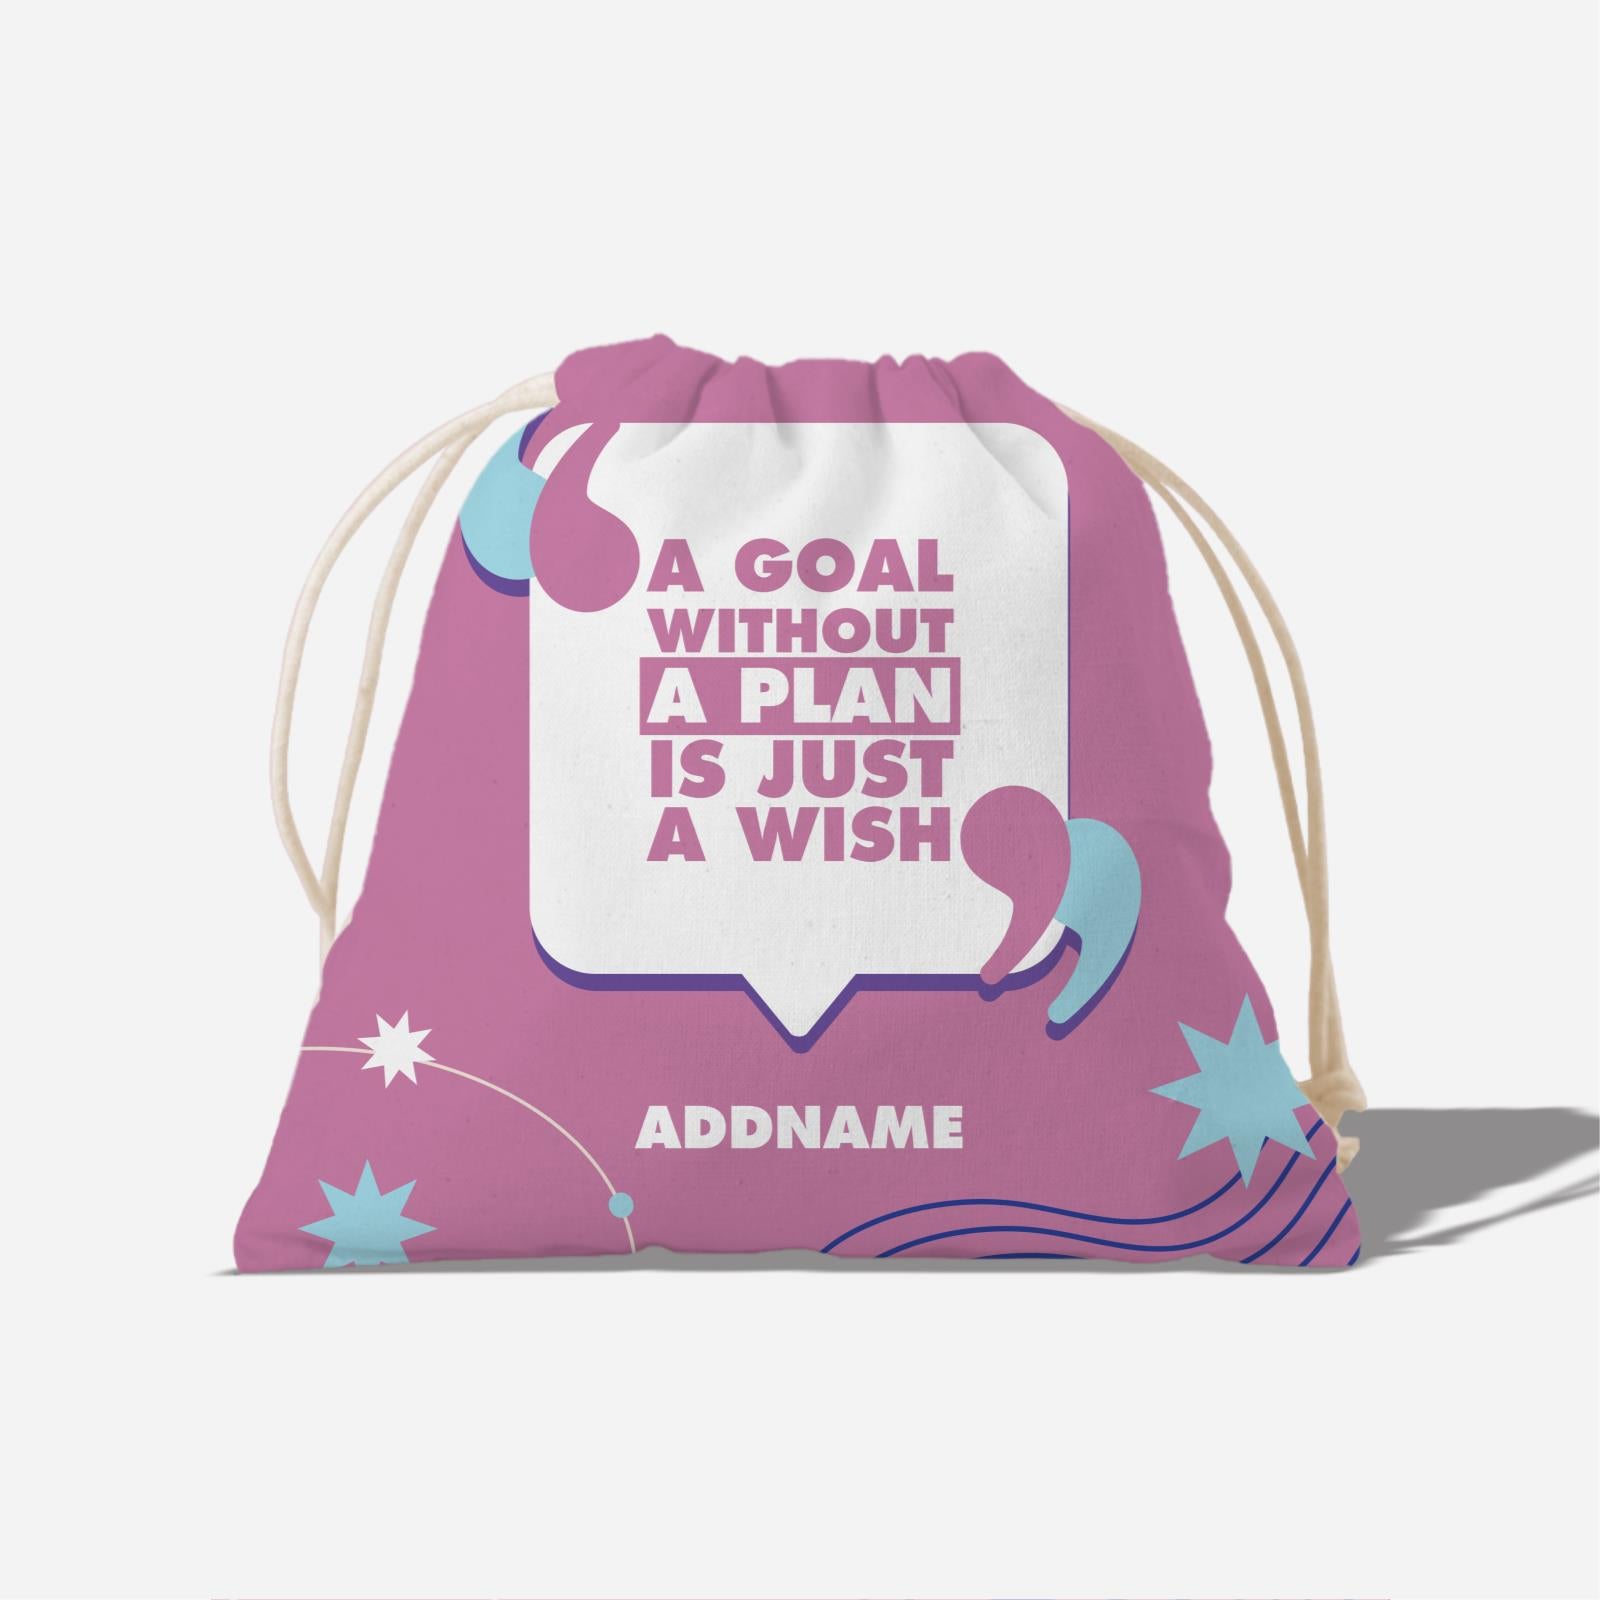 Be Confident Series Satchel - A Goal Without a Plan Is Just A Wish - Pink